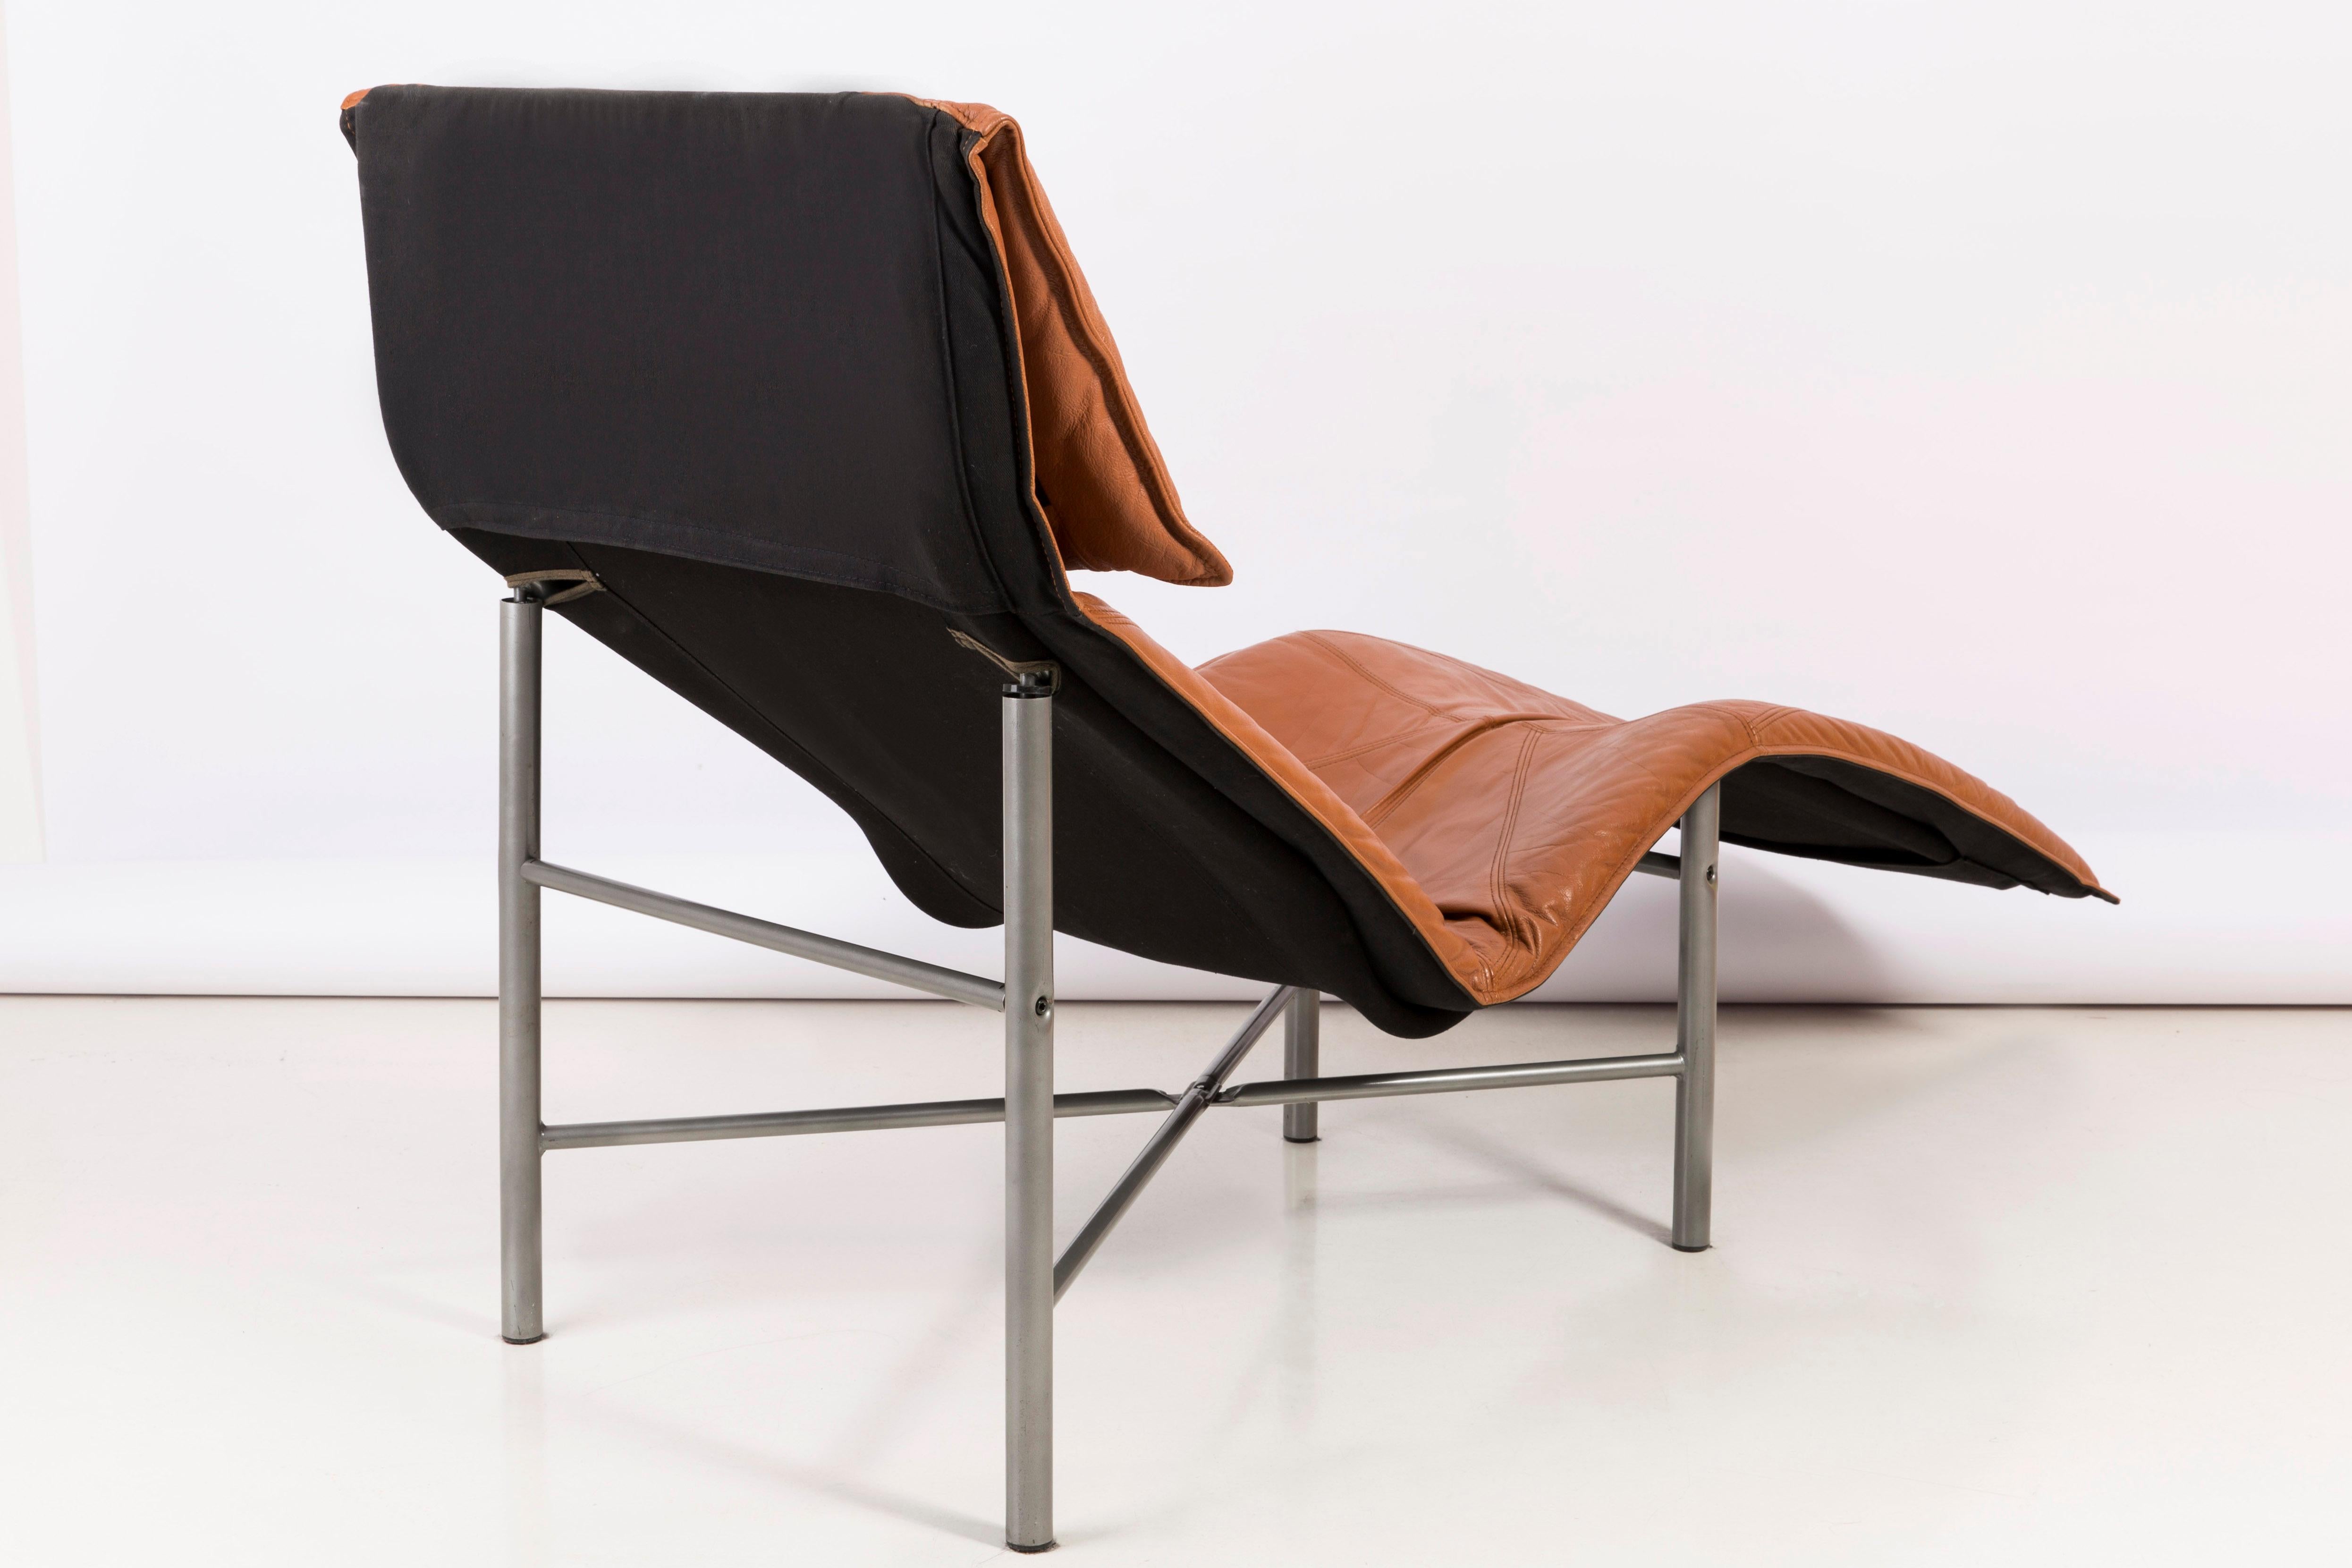 Two Midcentury Danish Modern Leather Chaise Lounge Chairs, Tord Björklund, 1980 For Sale 2